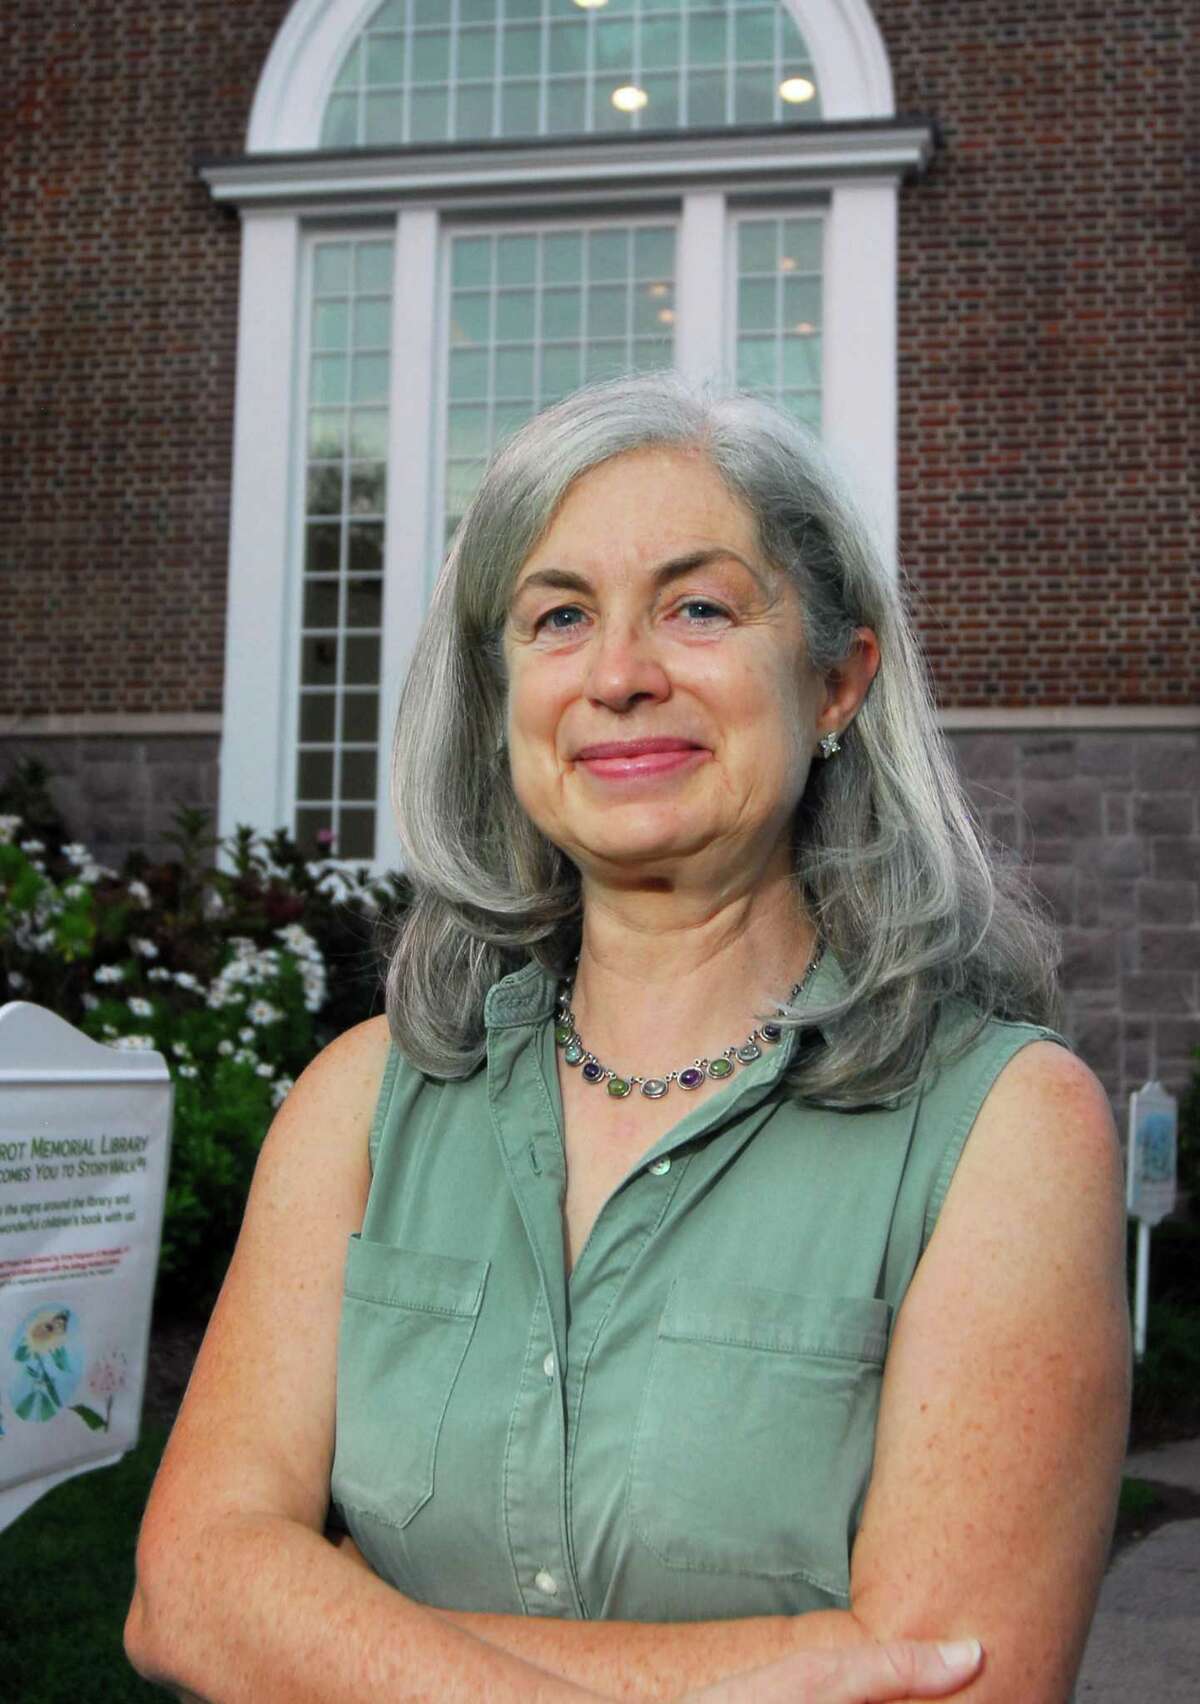 Janet Stone McGuigan, who is running for the Board of Selectmen, stands outside Perrot Library in Old Greenwich.